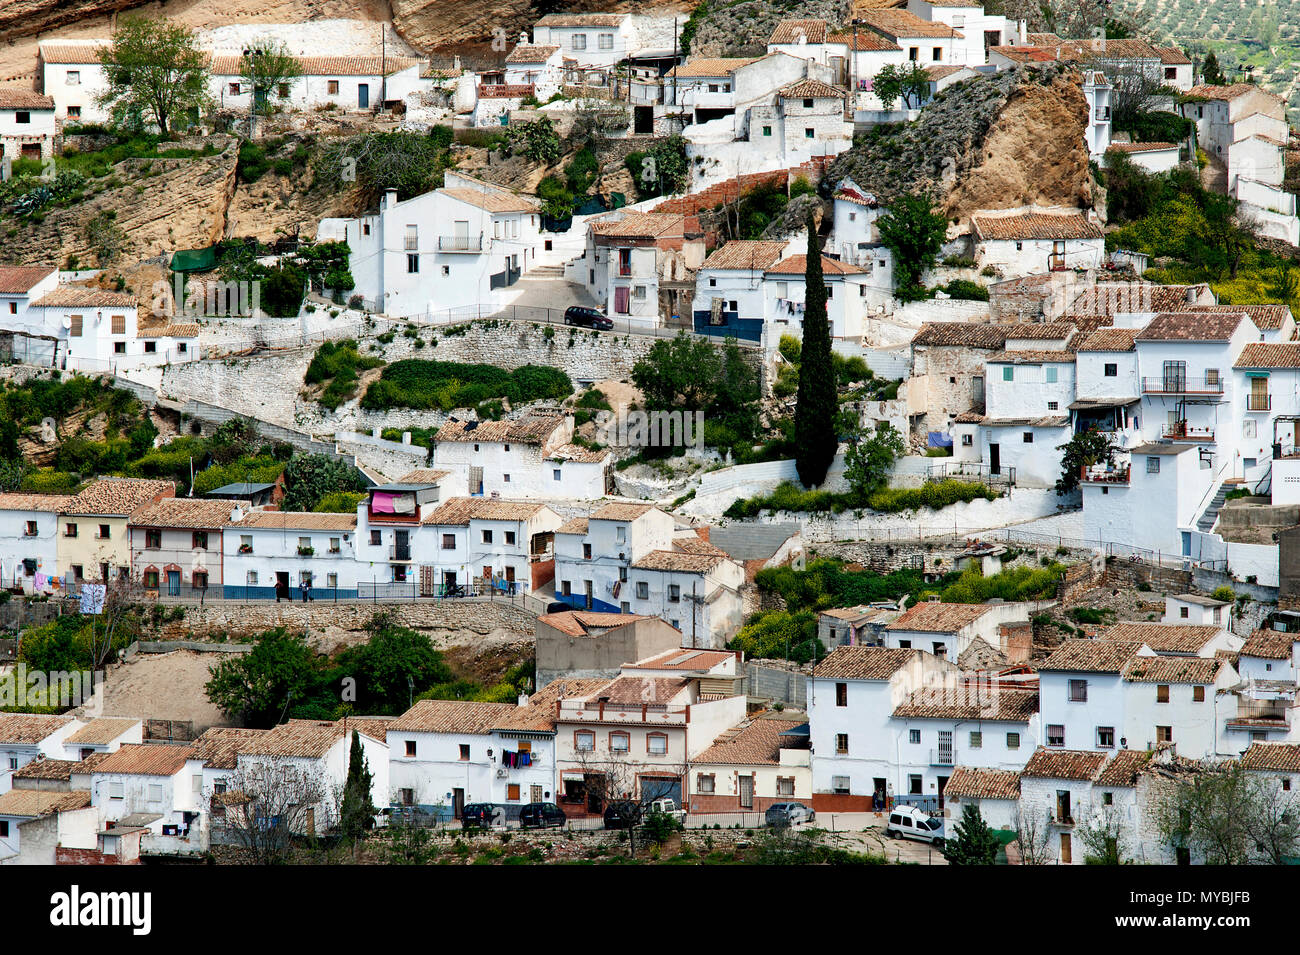 The picturesque Spanish town of Montefrio with its traditional whitewashed houses rising up the side of a hill in the Granada region of Andalucia. Stock Photo